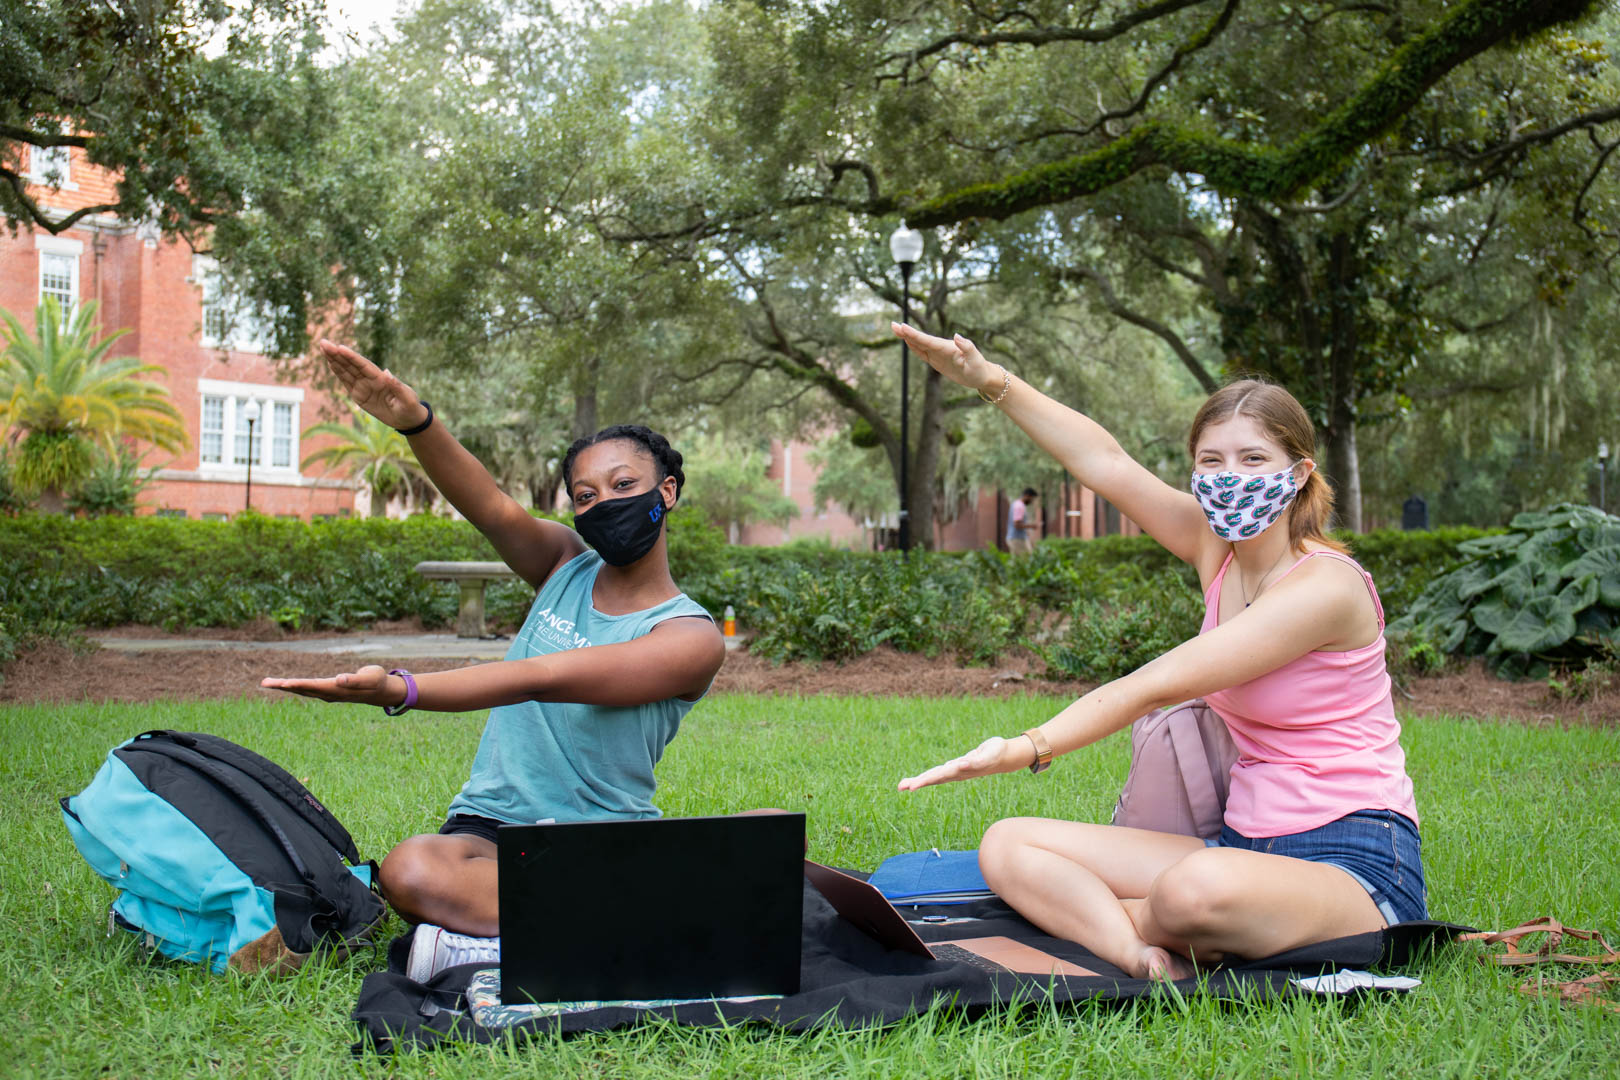 Two female students do a gator chomp while sitting on a lawn.